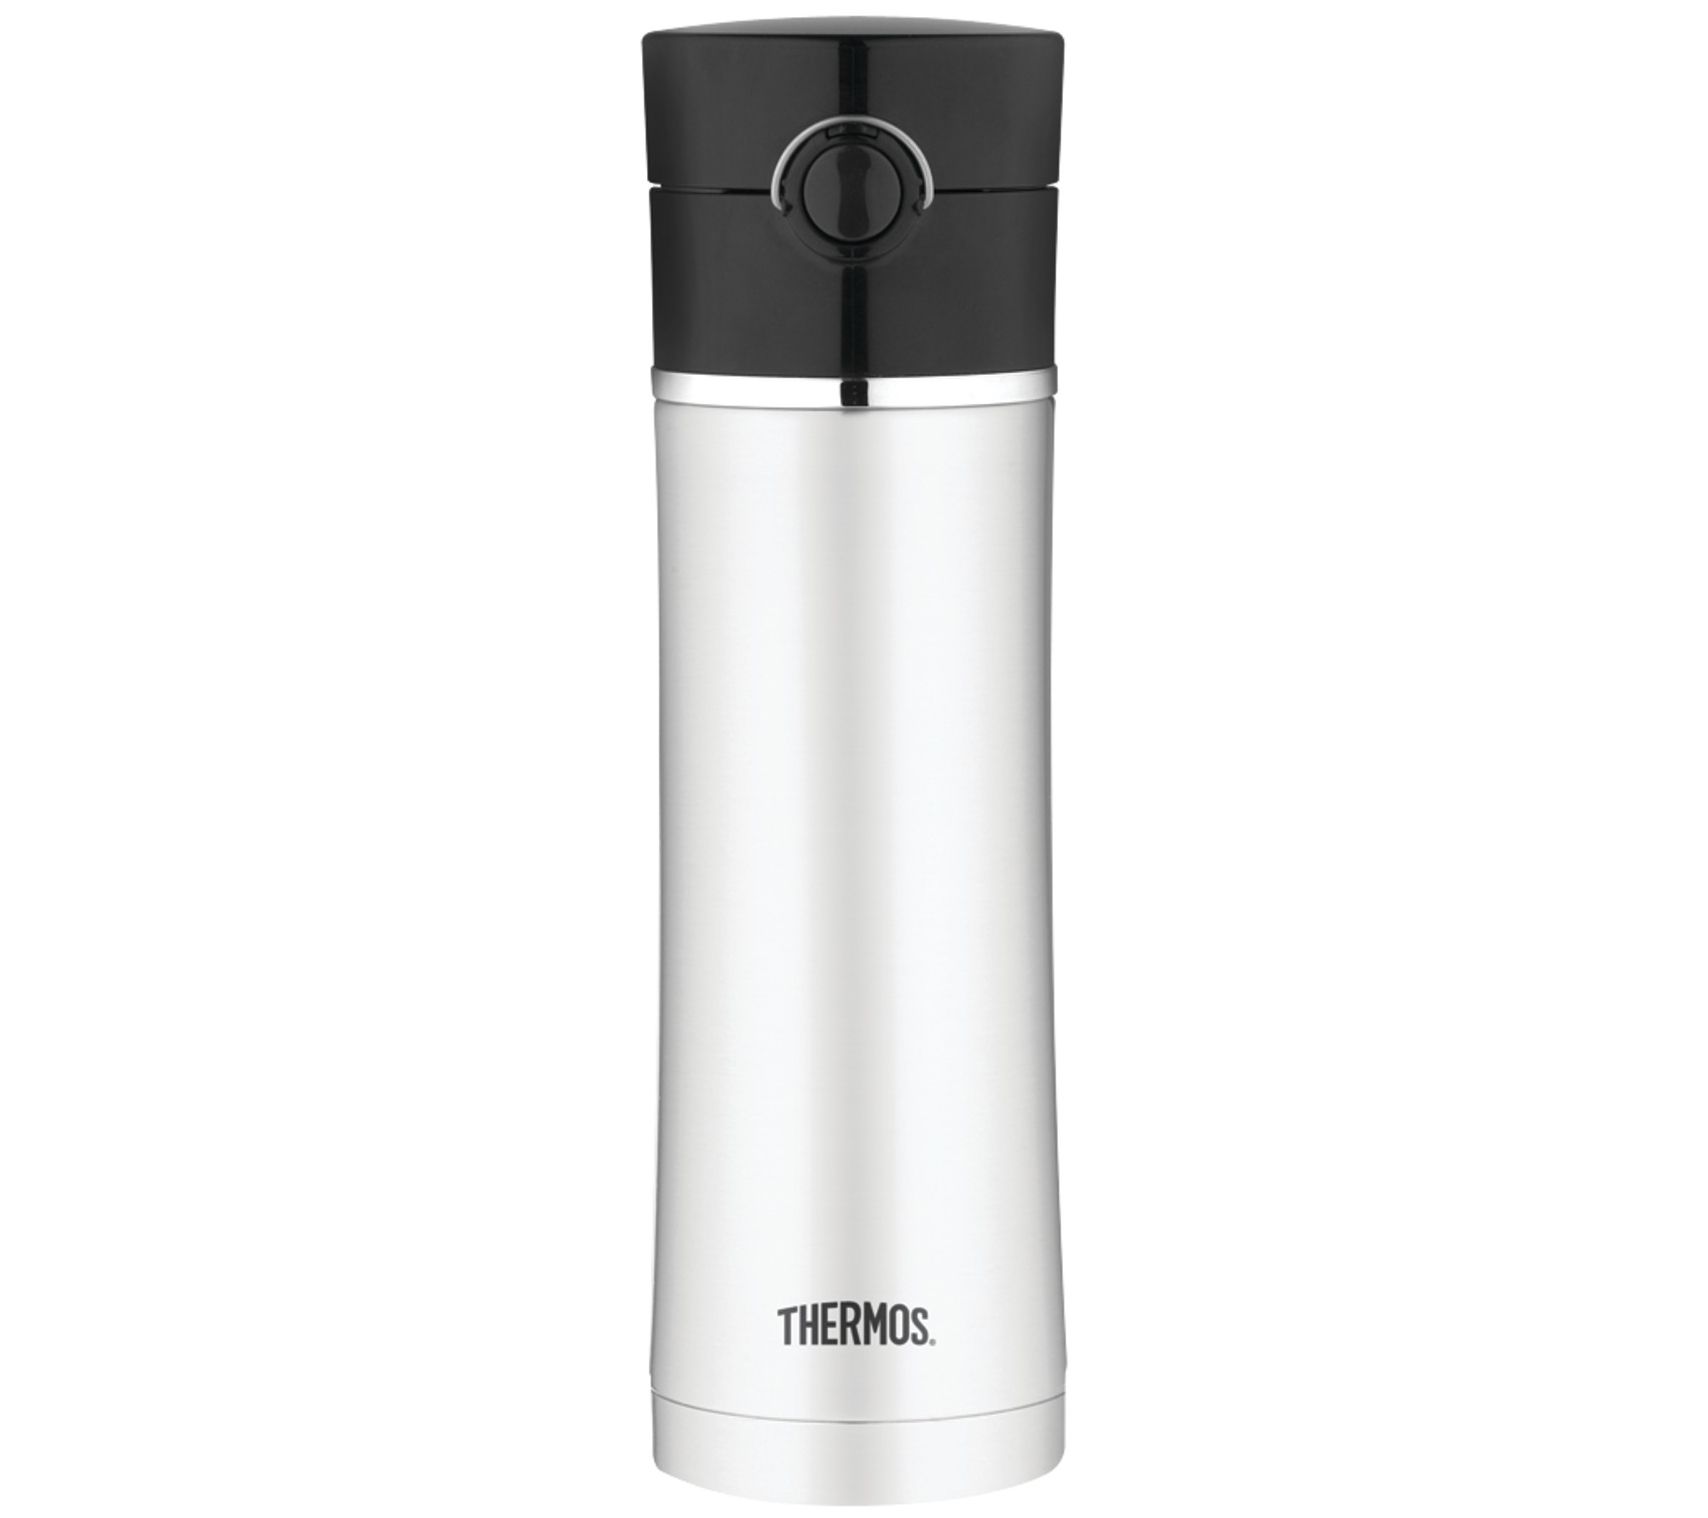 Thermos 16 Oz Sipp Vacuum Insulated Stainless Steel Drink Bottle